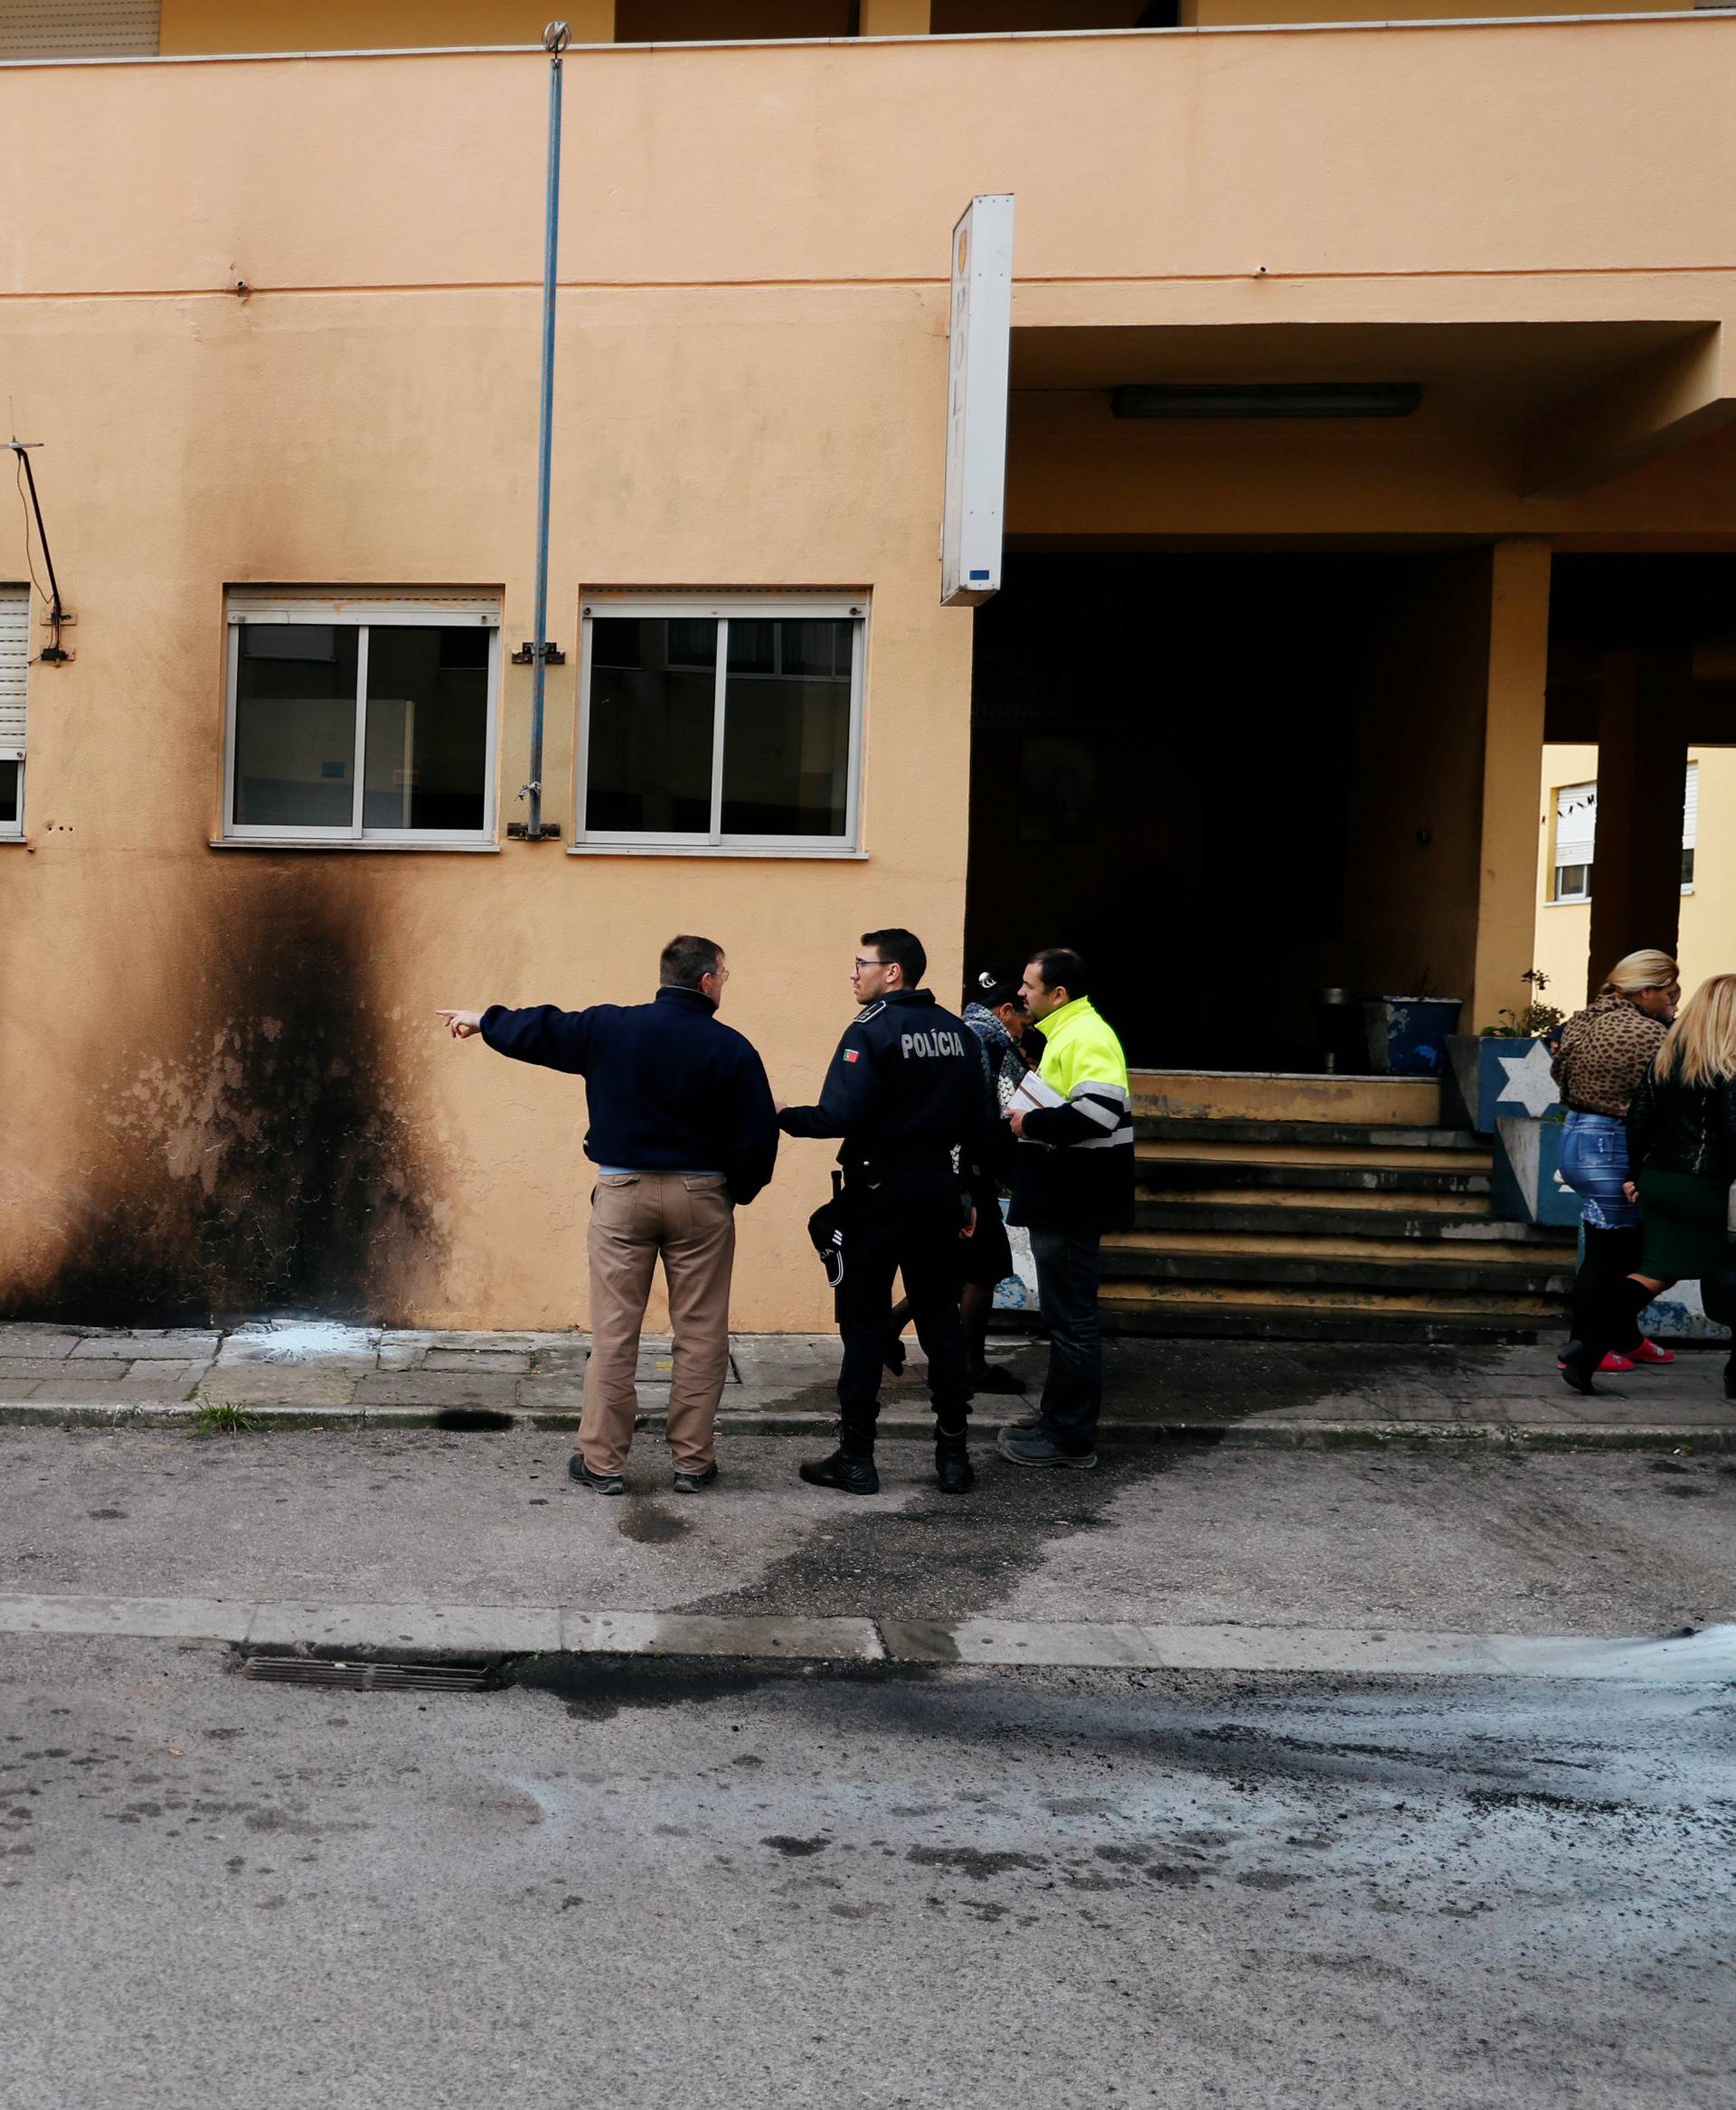 The police officers are seen near the damage caused by molotov cocktails is seen on the police station building at the Bela Vista neighborhood in Setubal